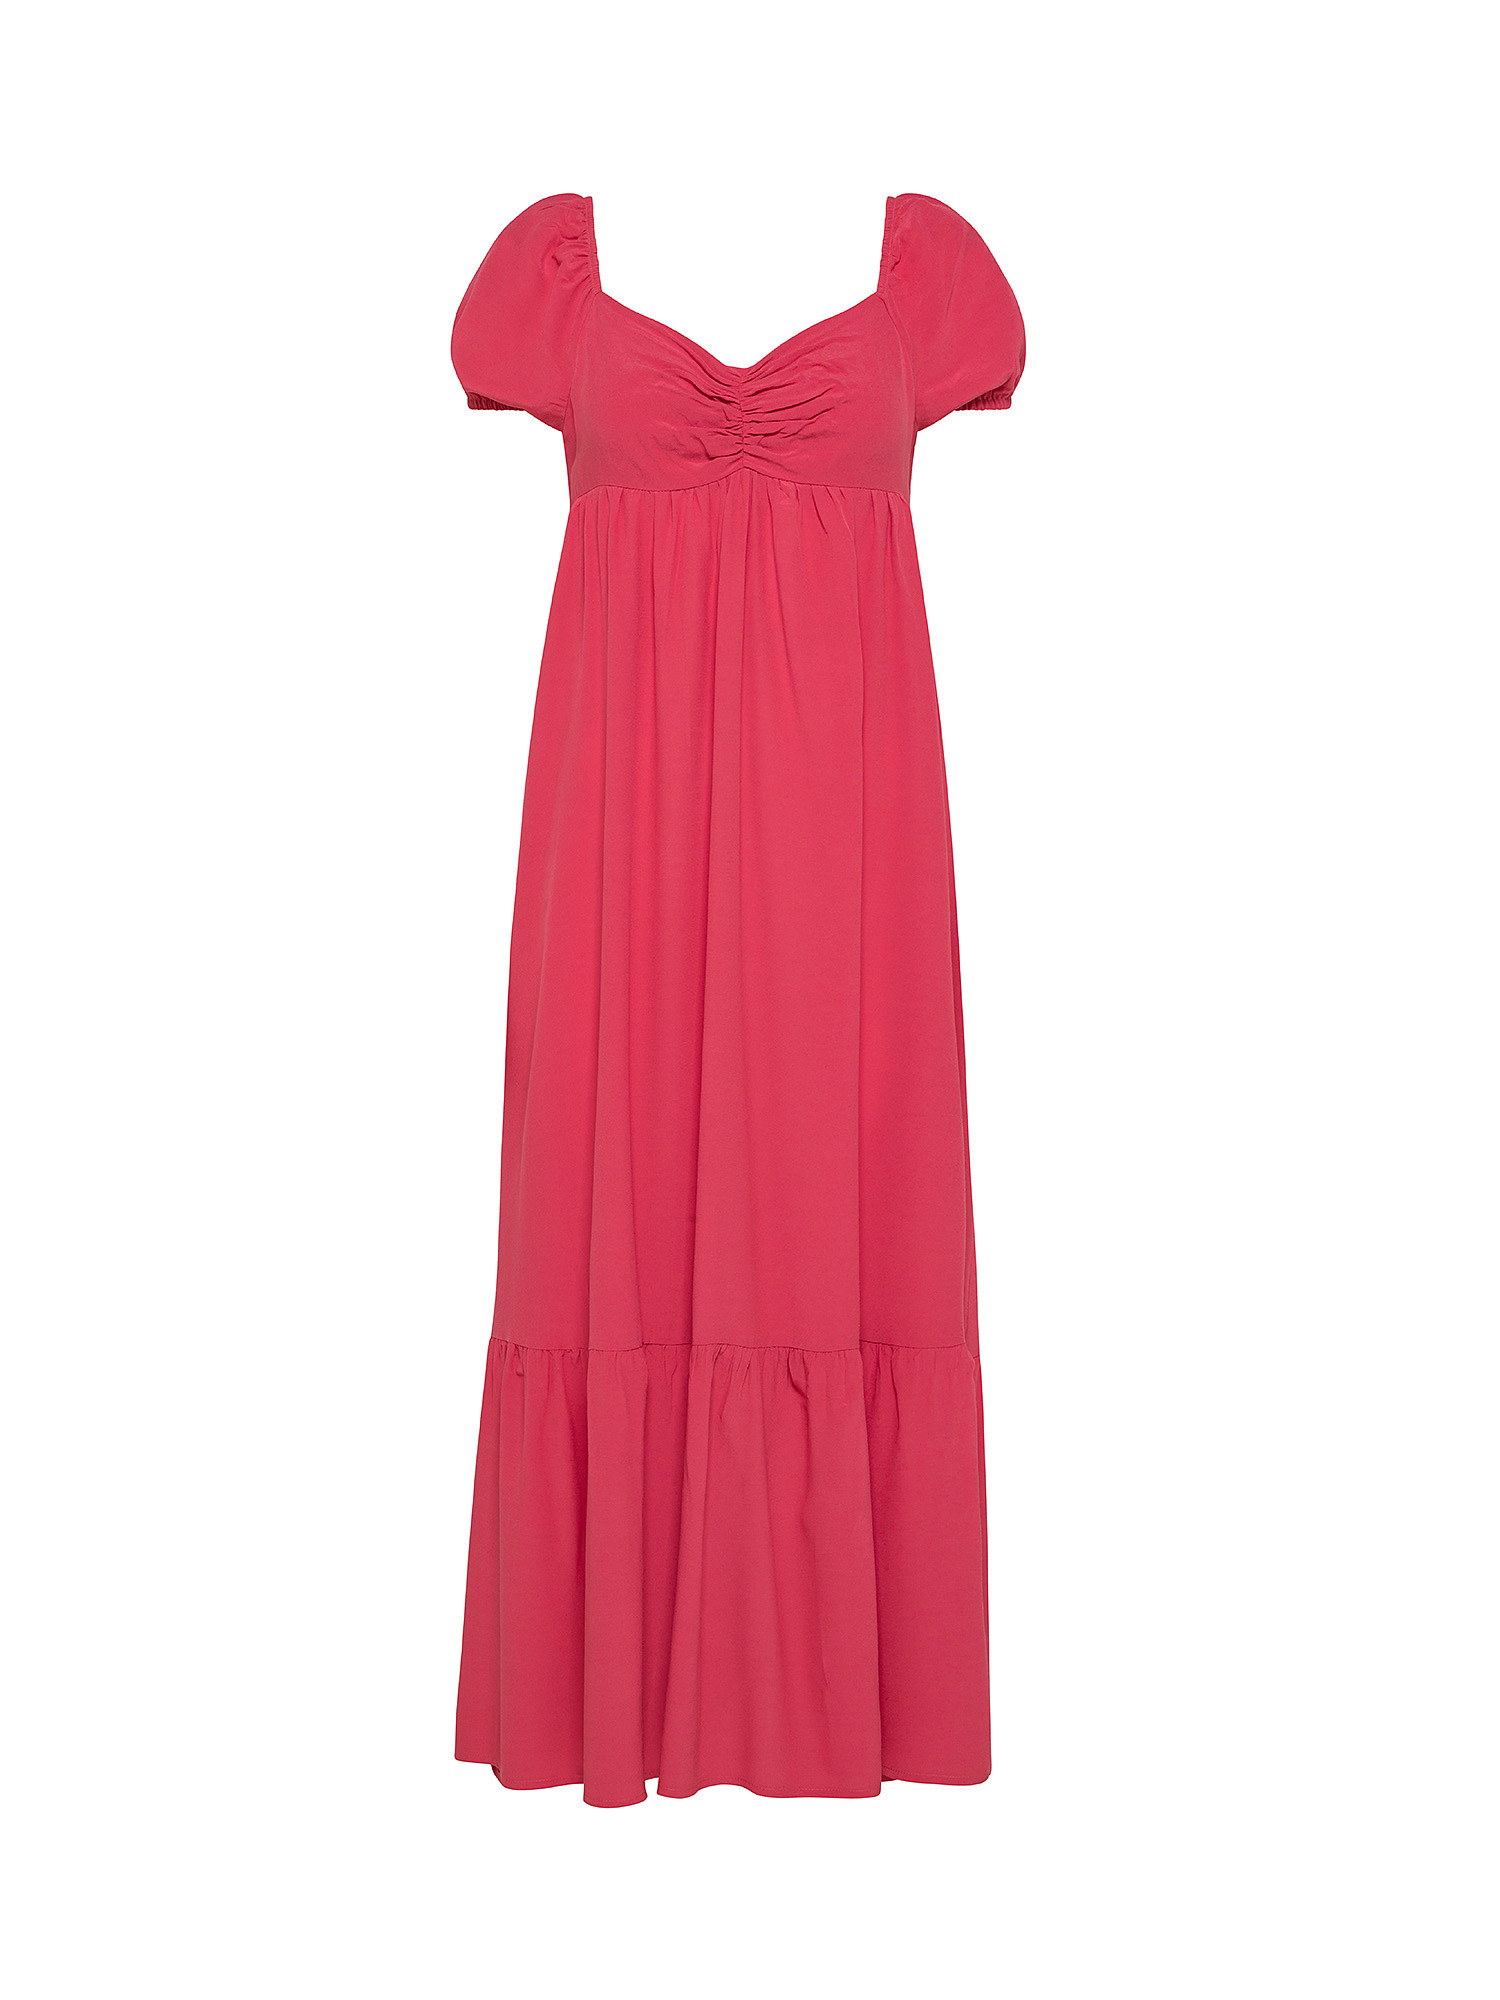 Pepe Jeans - Long flowing dress, Coral Red, large image number 0